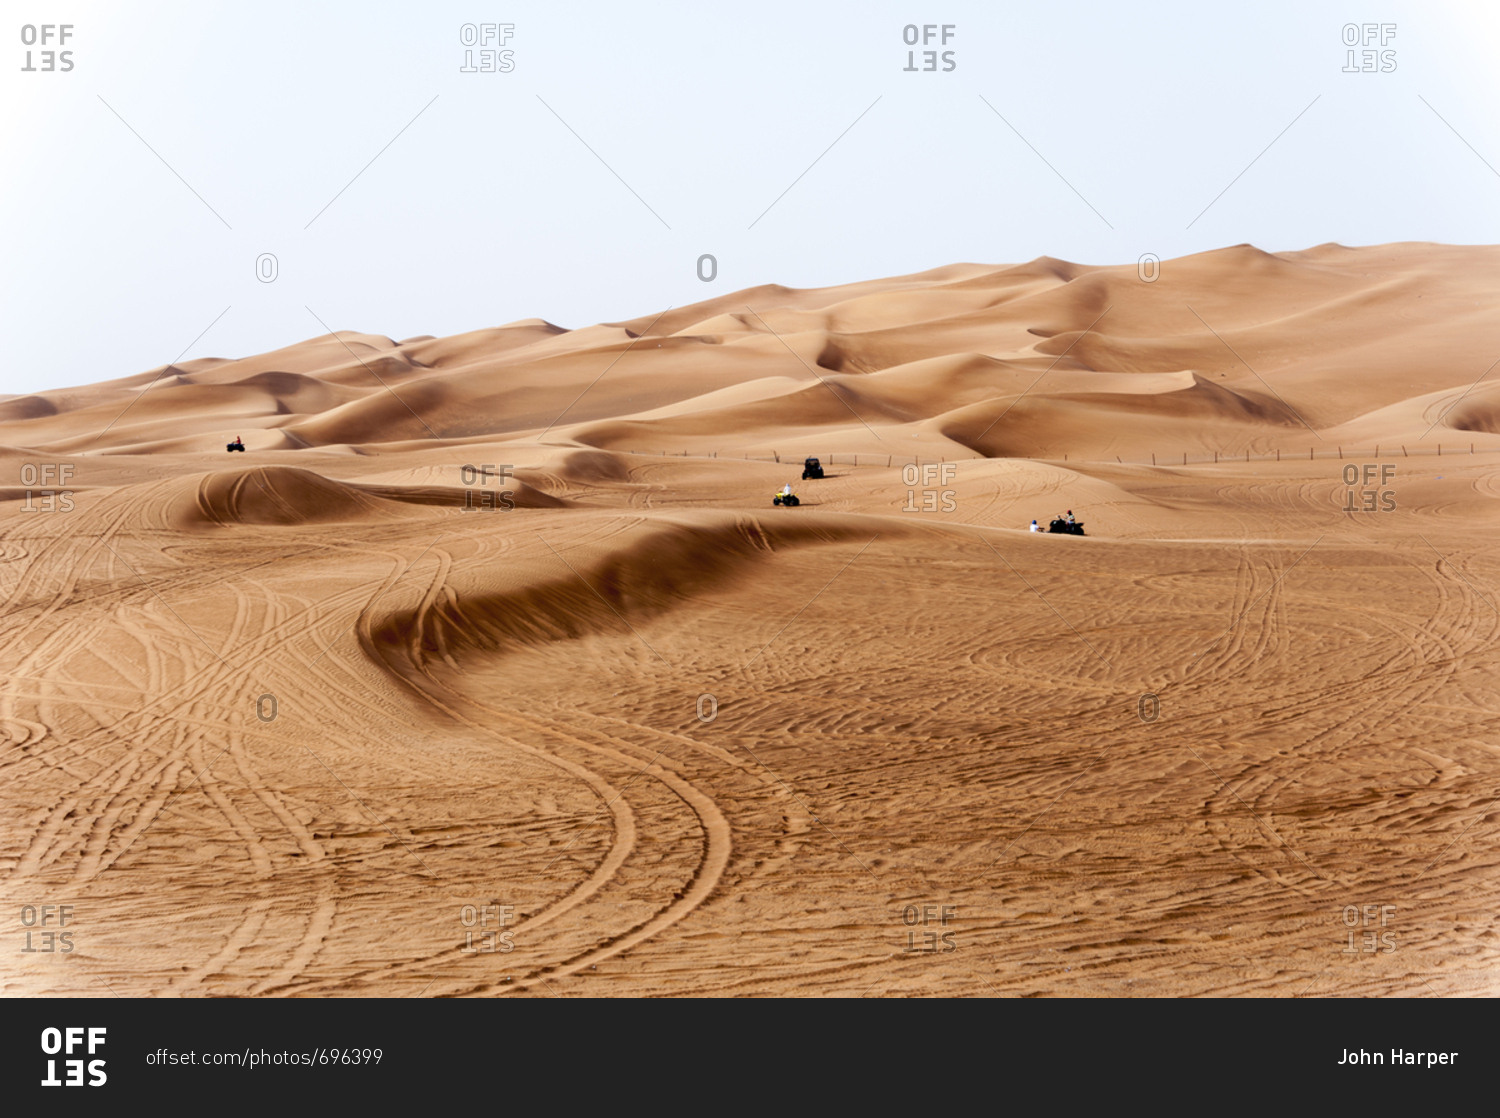 People riding all terrain vehicles in the sand dunes in the desert of Dubai, United Arab Emirates